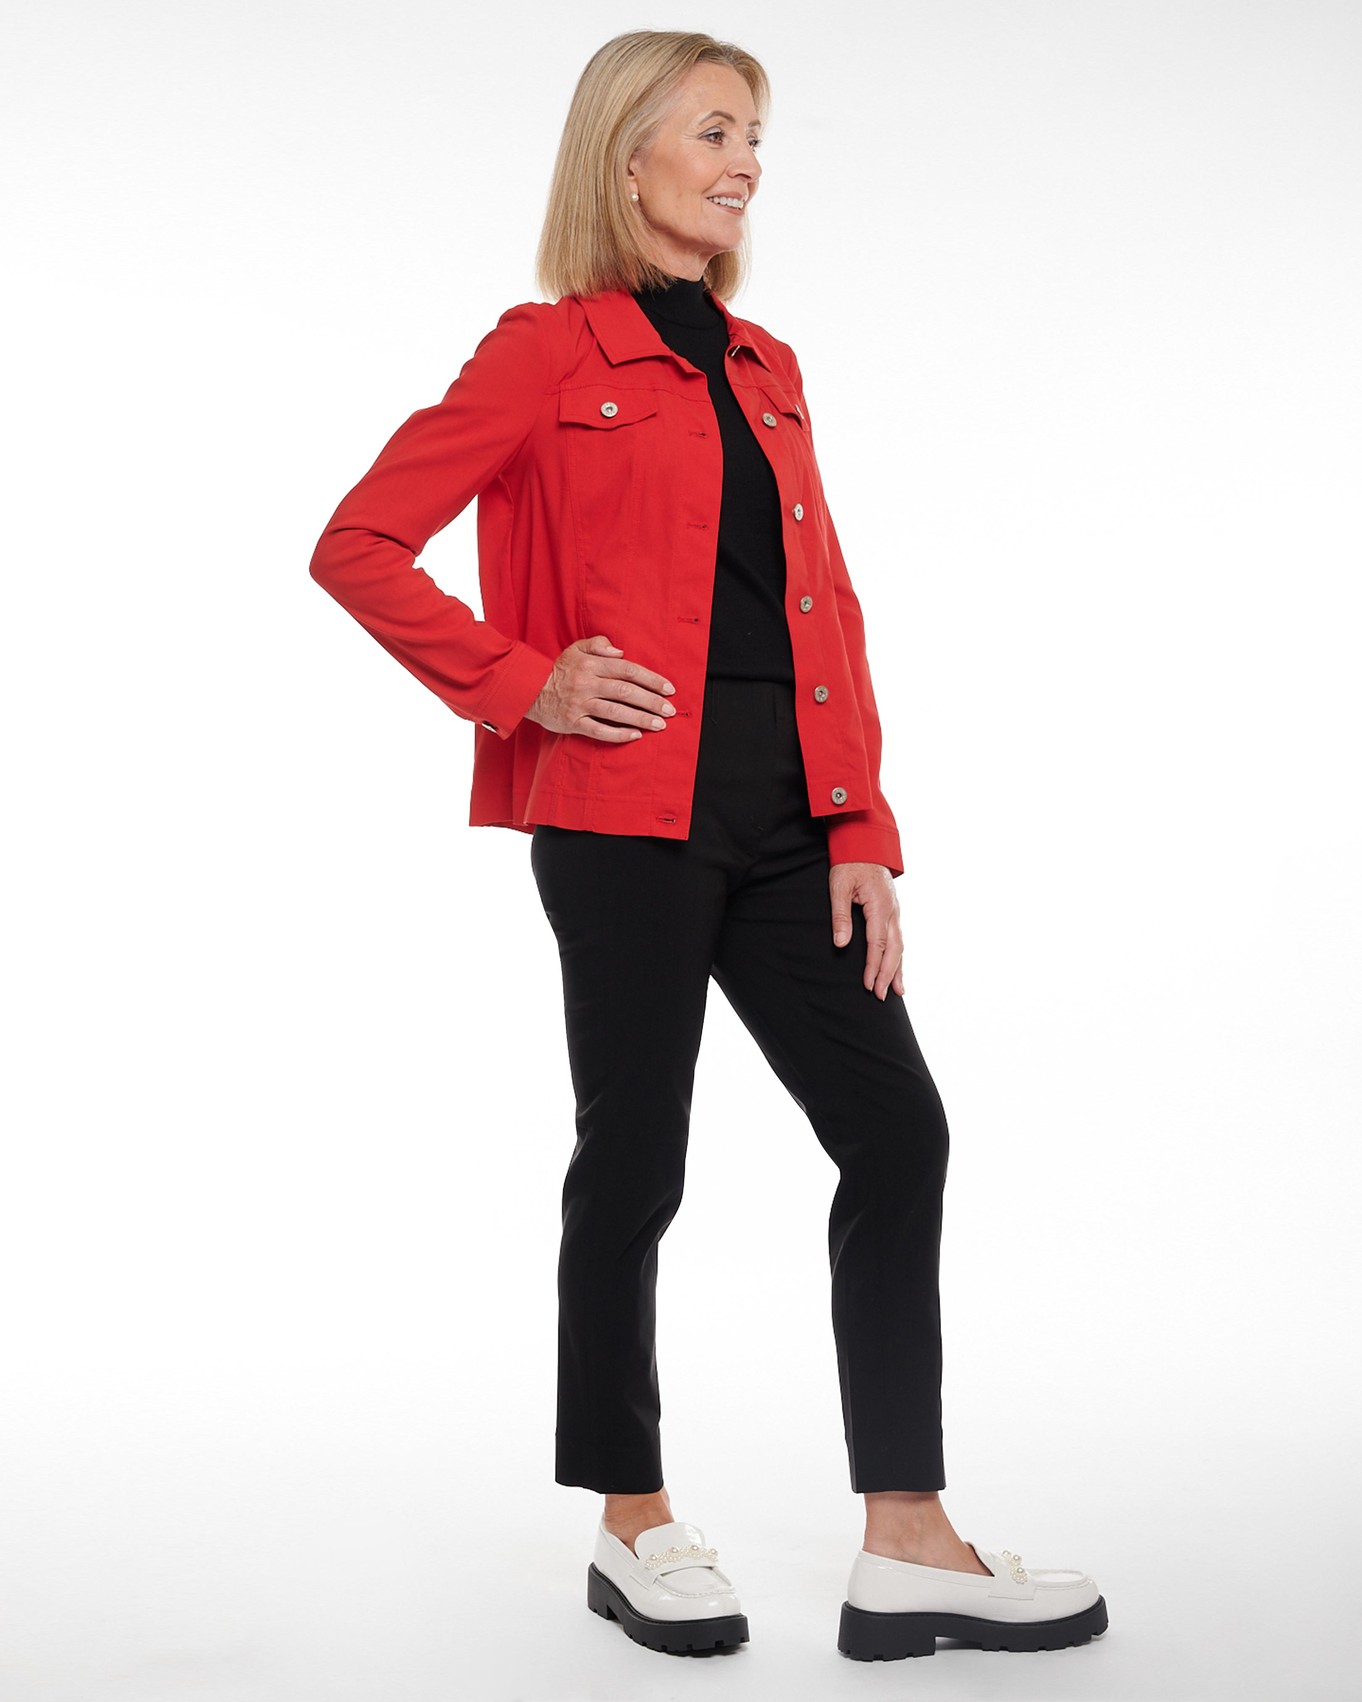 Red Robell Happy Jacket with Fine Knit Roll Neck and Black Trousers Outfit